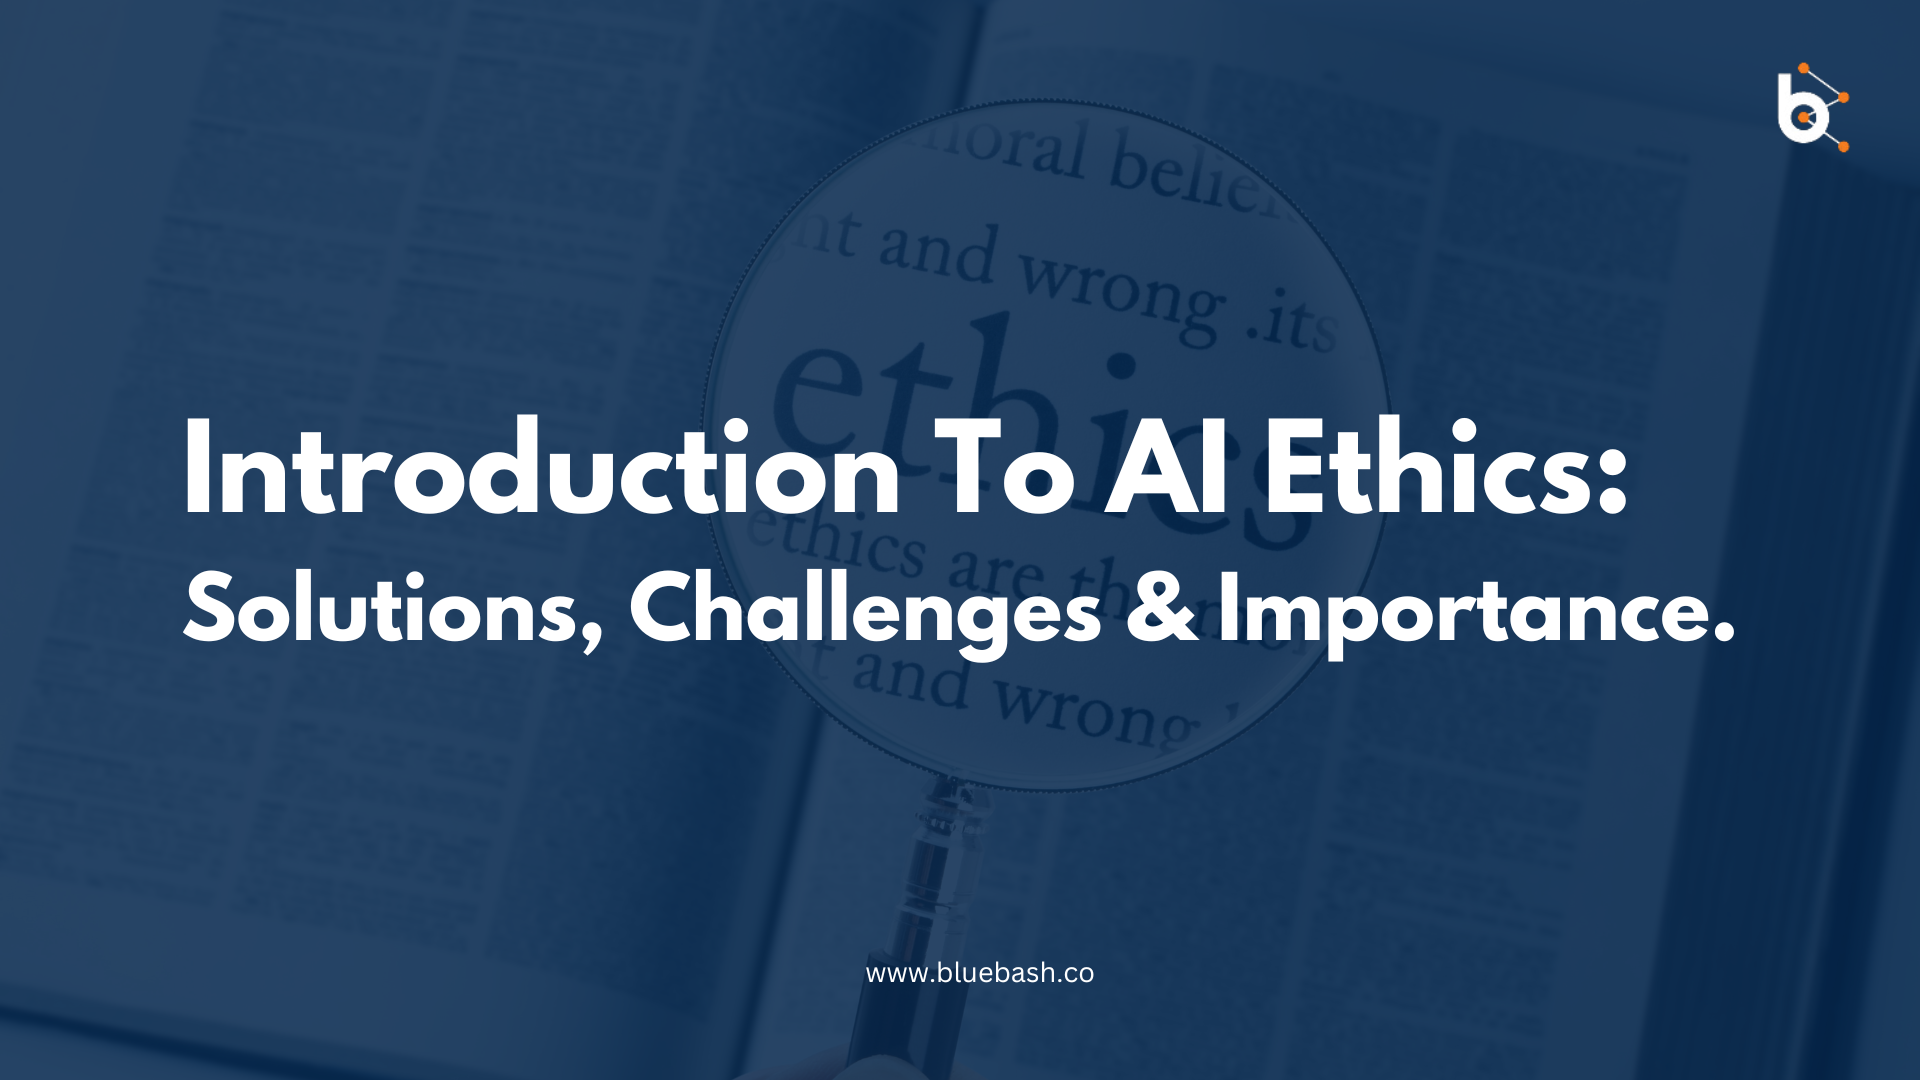 What is AI Ethics and Why it important?